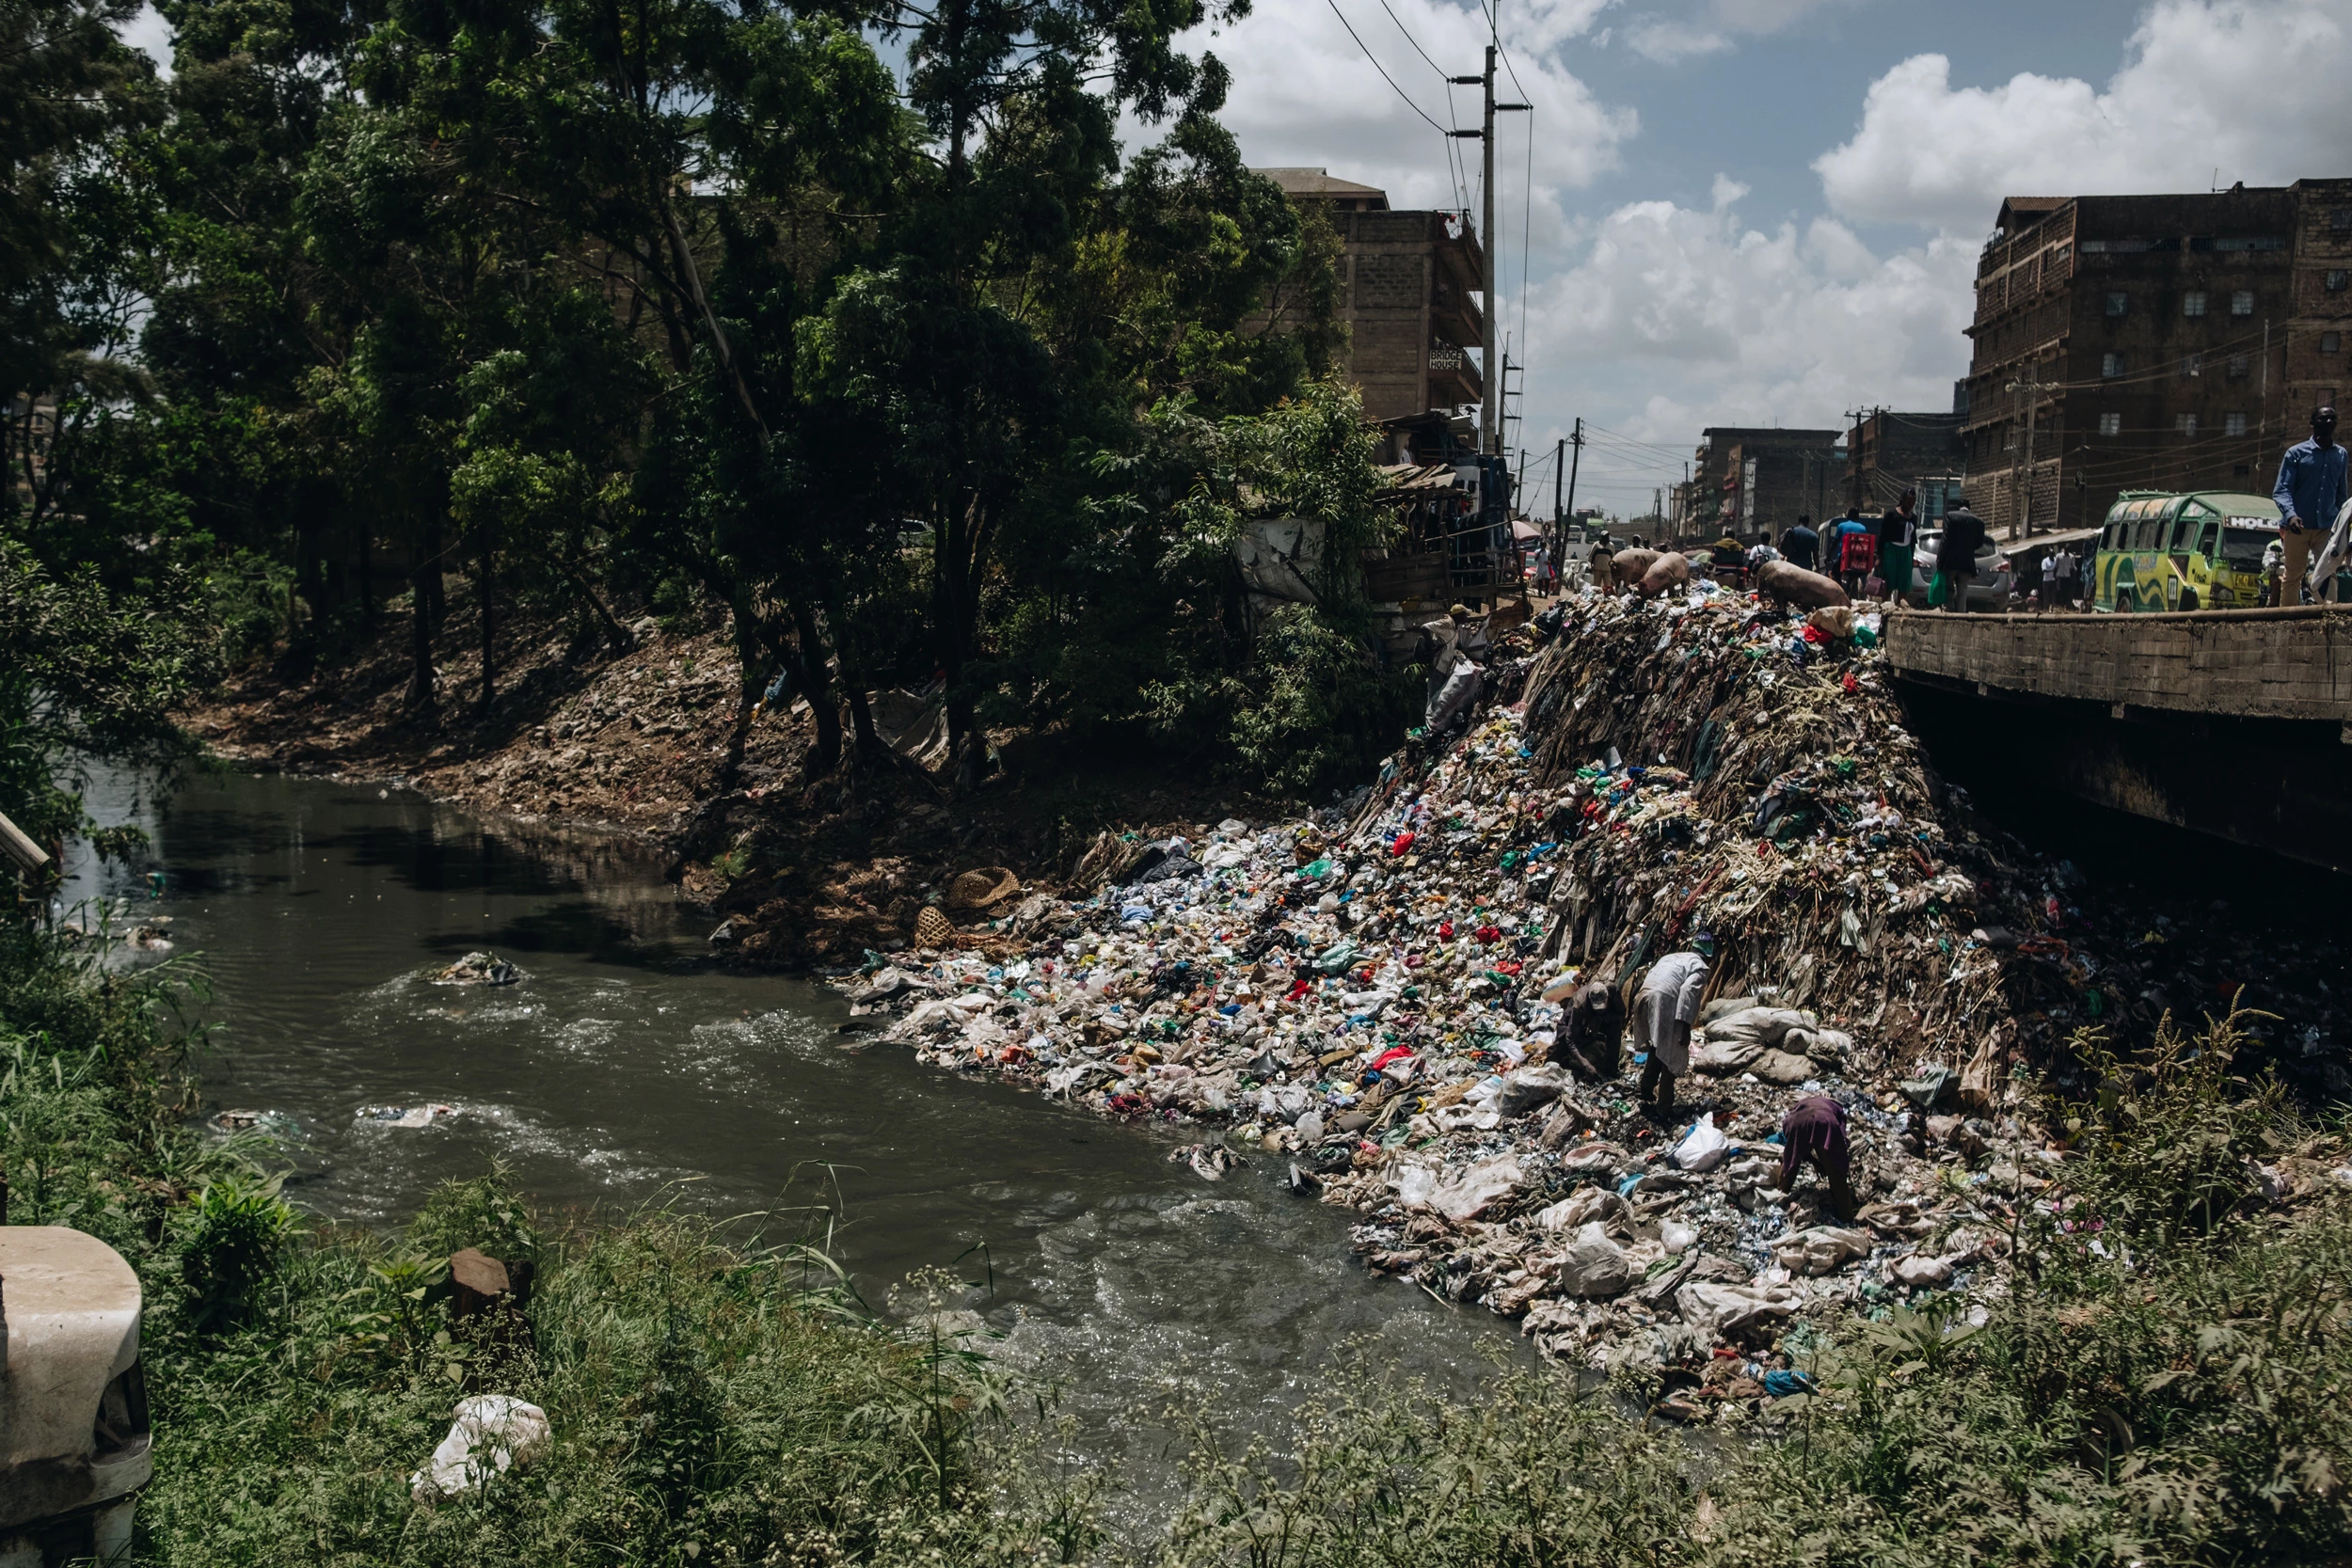 Plastic waste covers the banks of the Nairobi River on Feb. 15, 2020. Though the river is polluted, it is used by residents of low-income settlements as a source of water for cleaning, bathing, and watering crops.